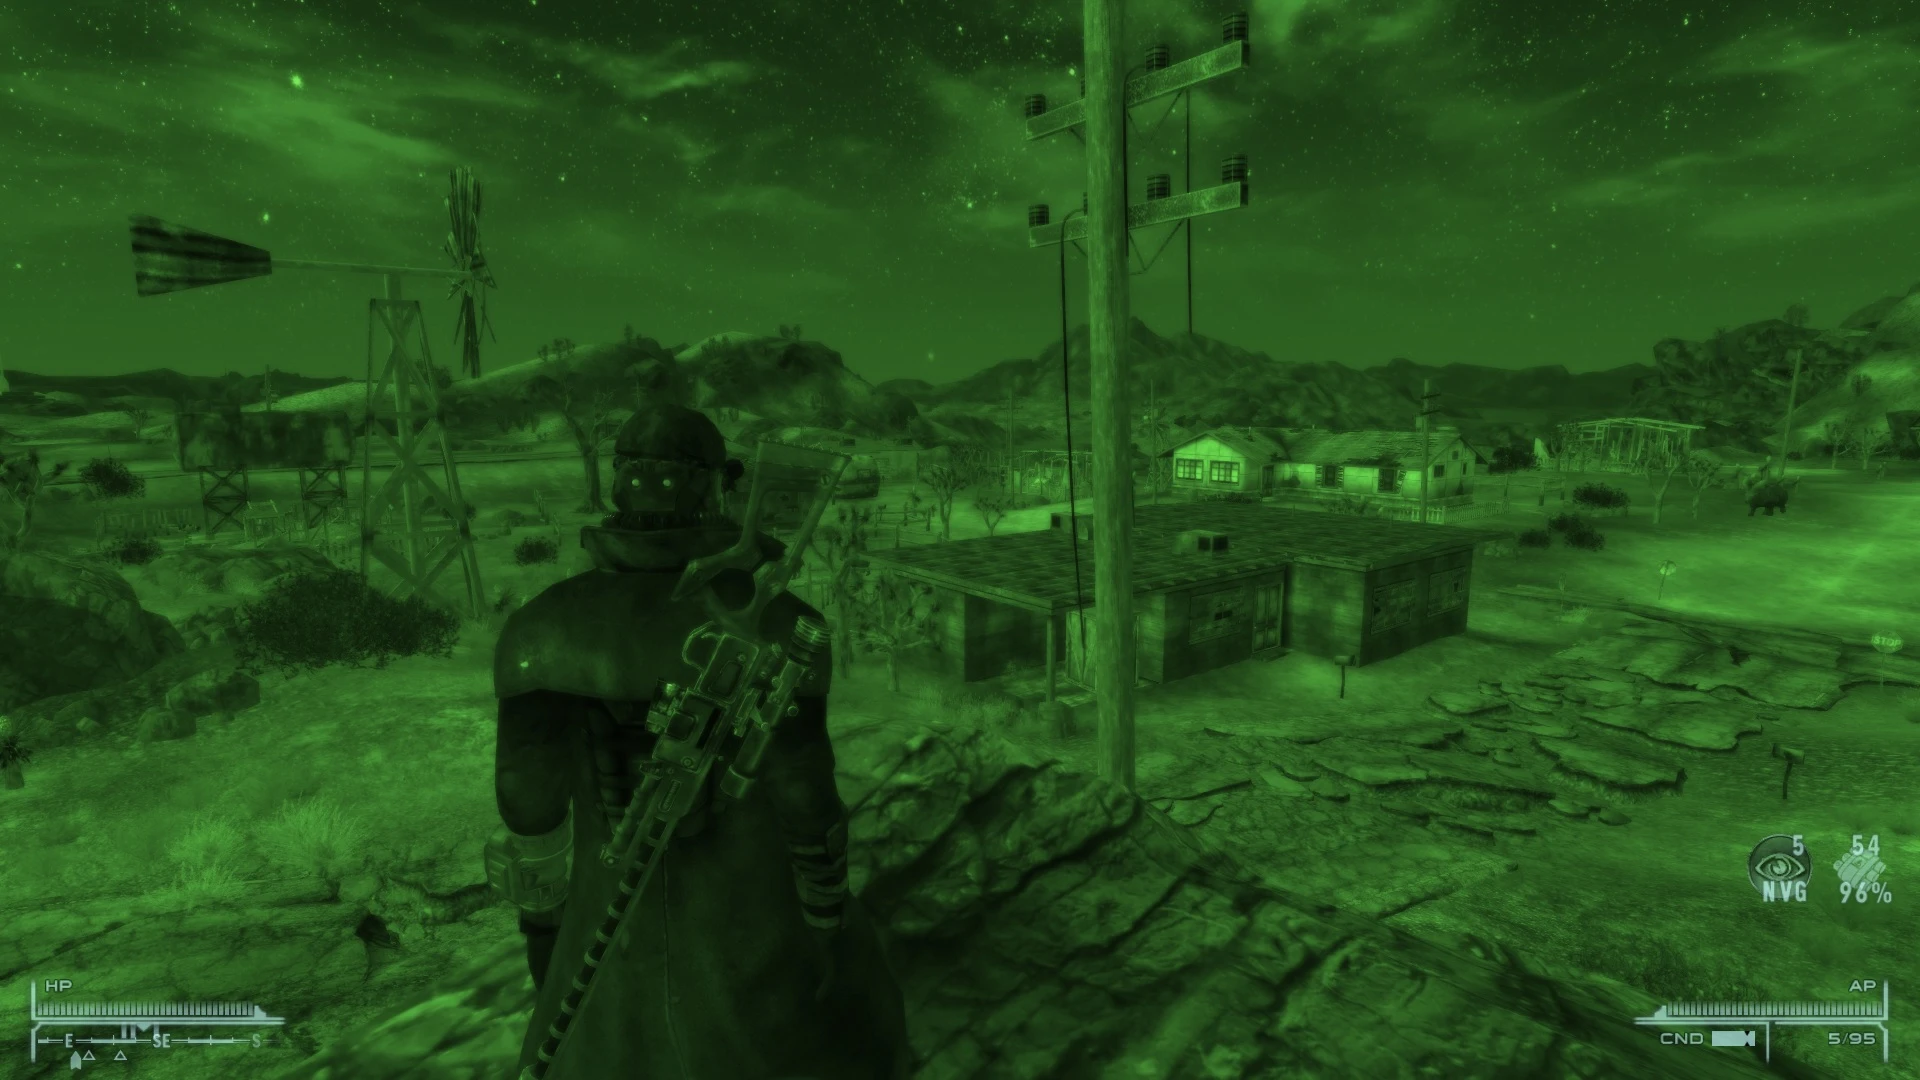 Night vision in fallout 4 фото 6